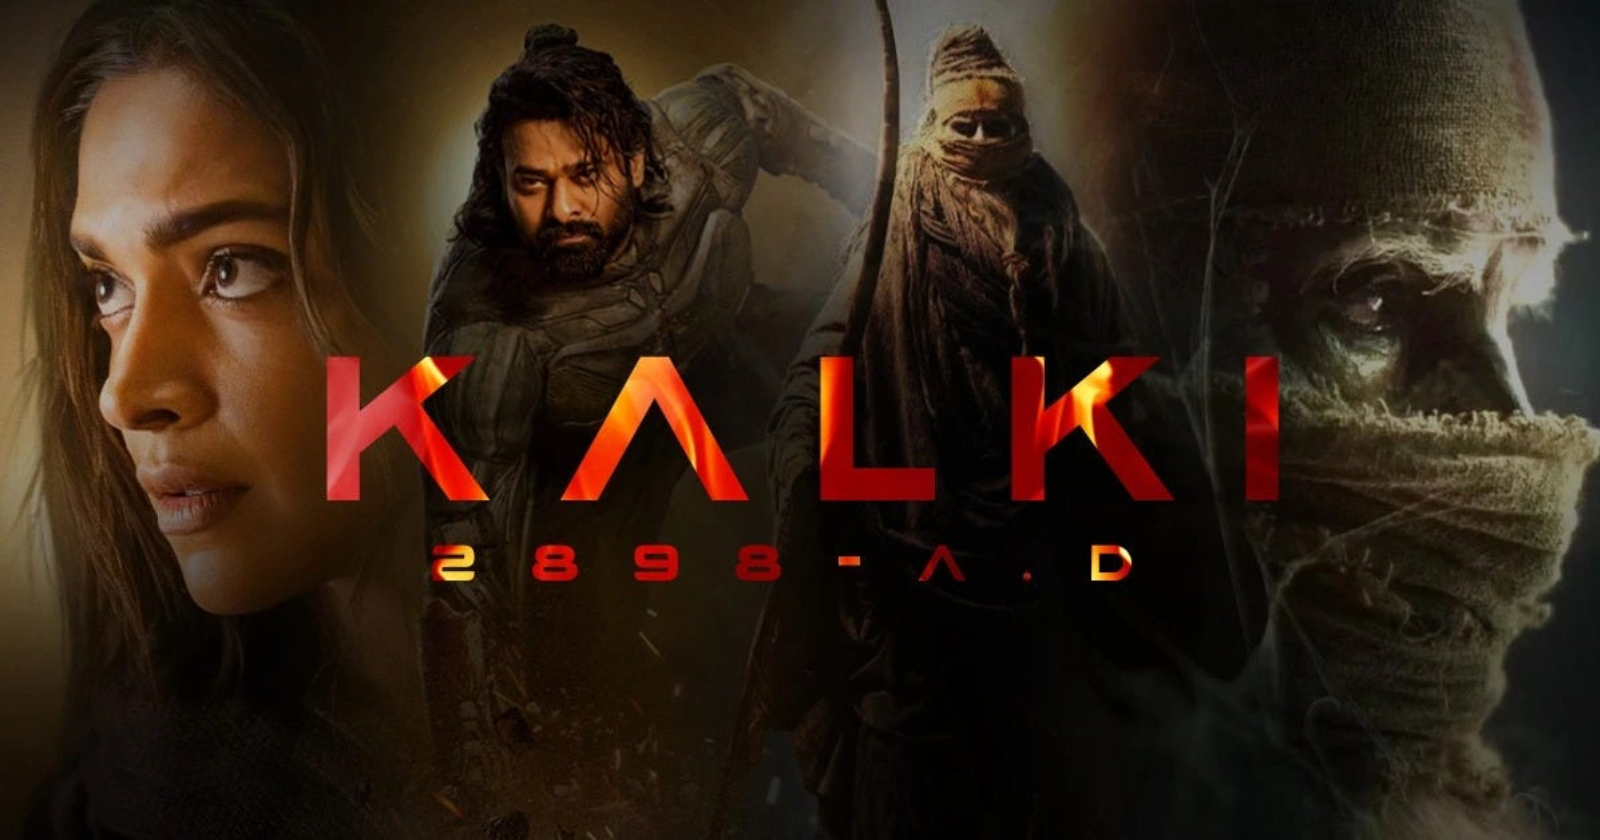 Prabhas039 Fee for Kalki 2898 AD Exceeds the Budgets of